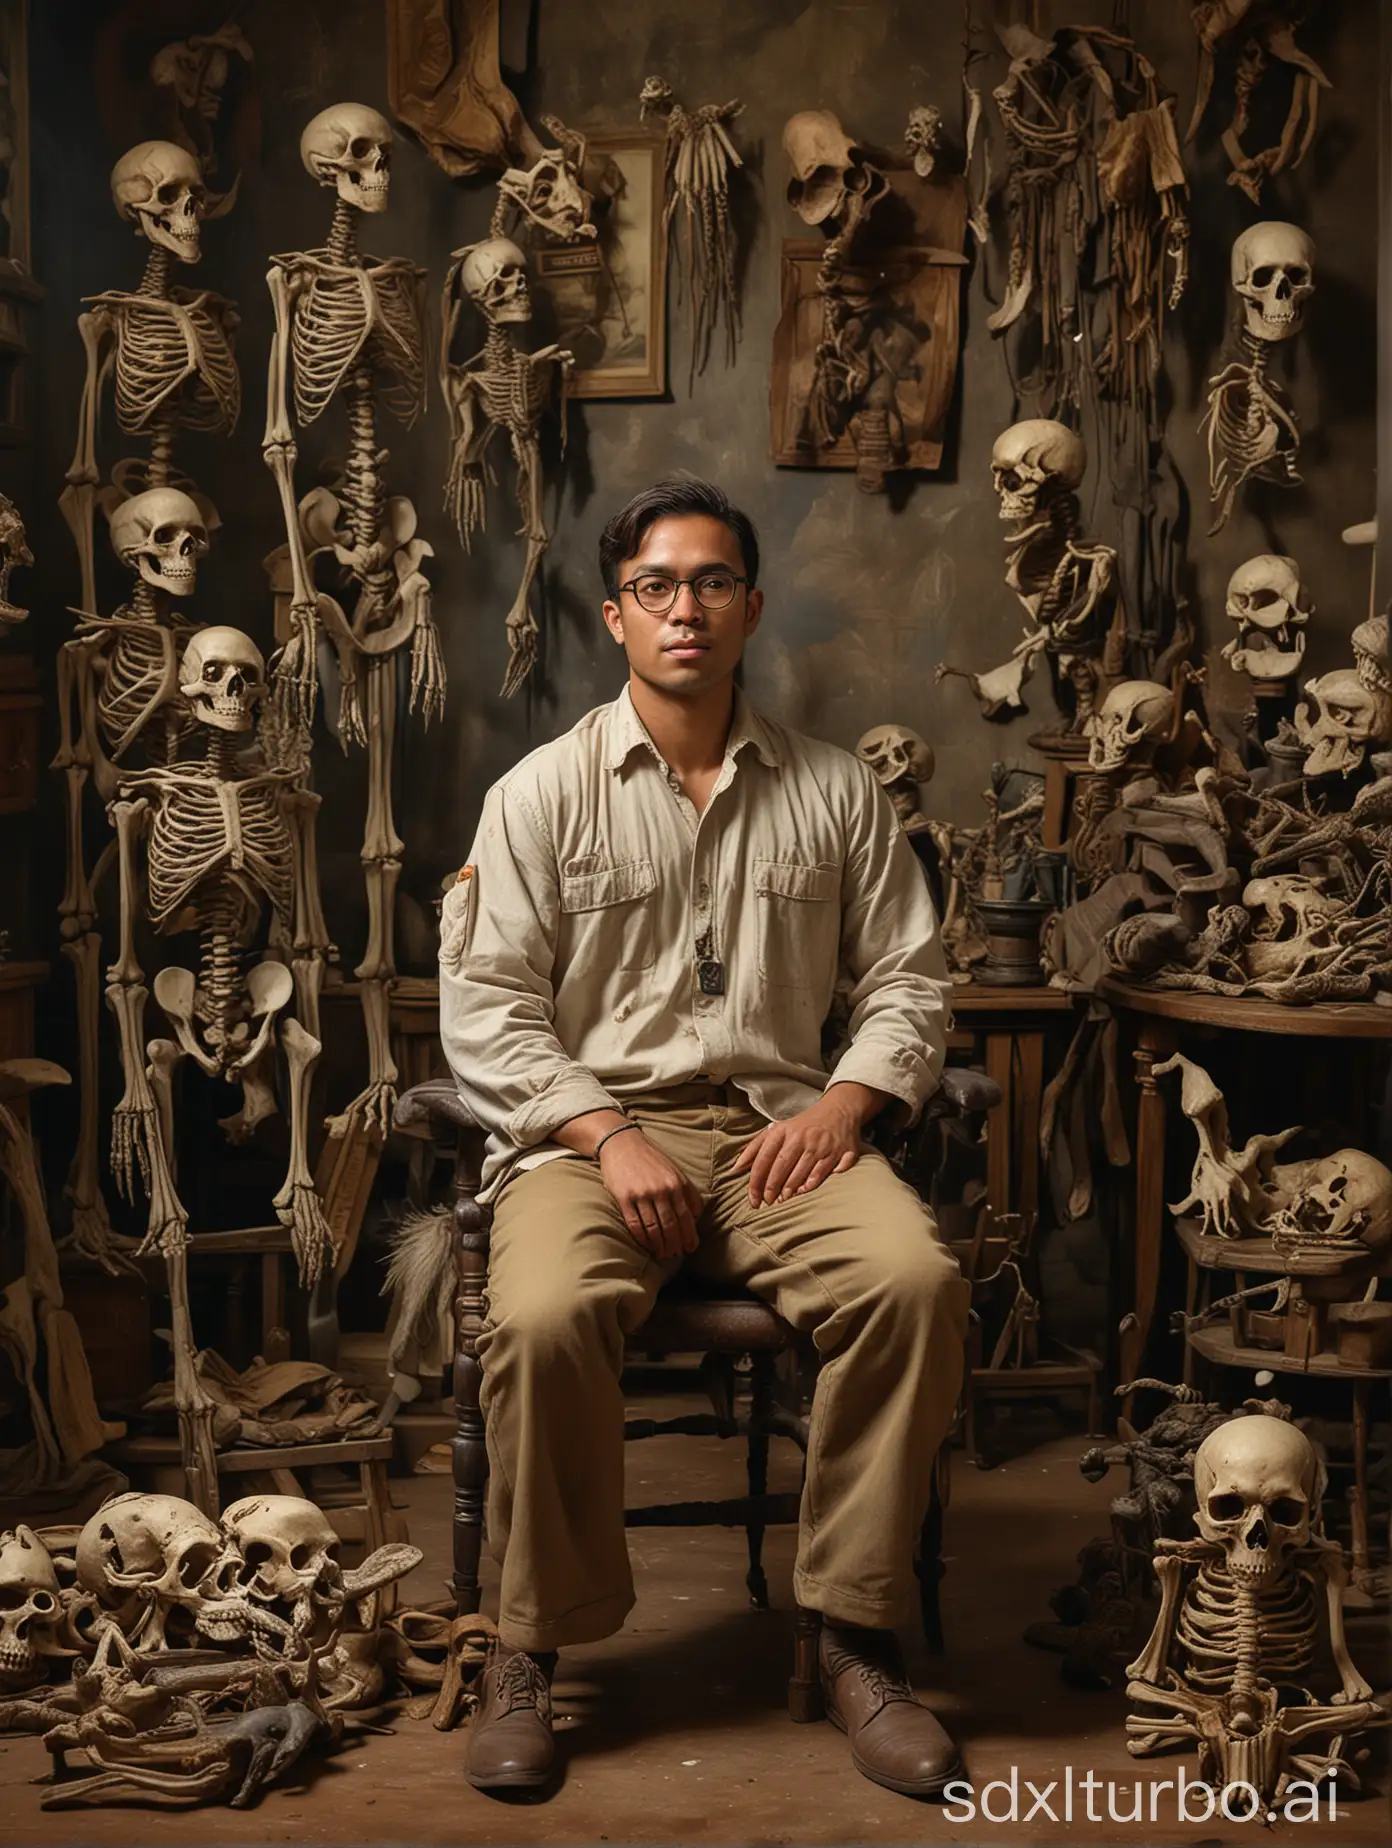 Paleontologist-in-Traditional-Painter-Costume-Surrounded-by-Animal-Skeletons